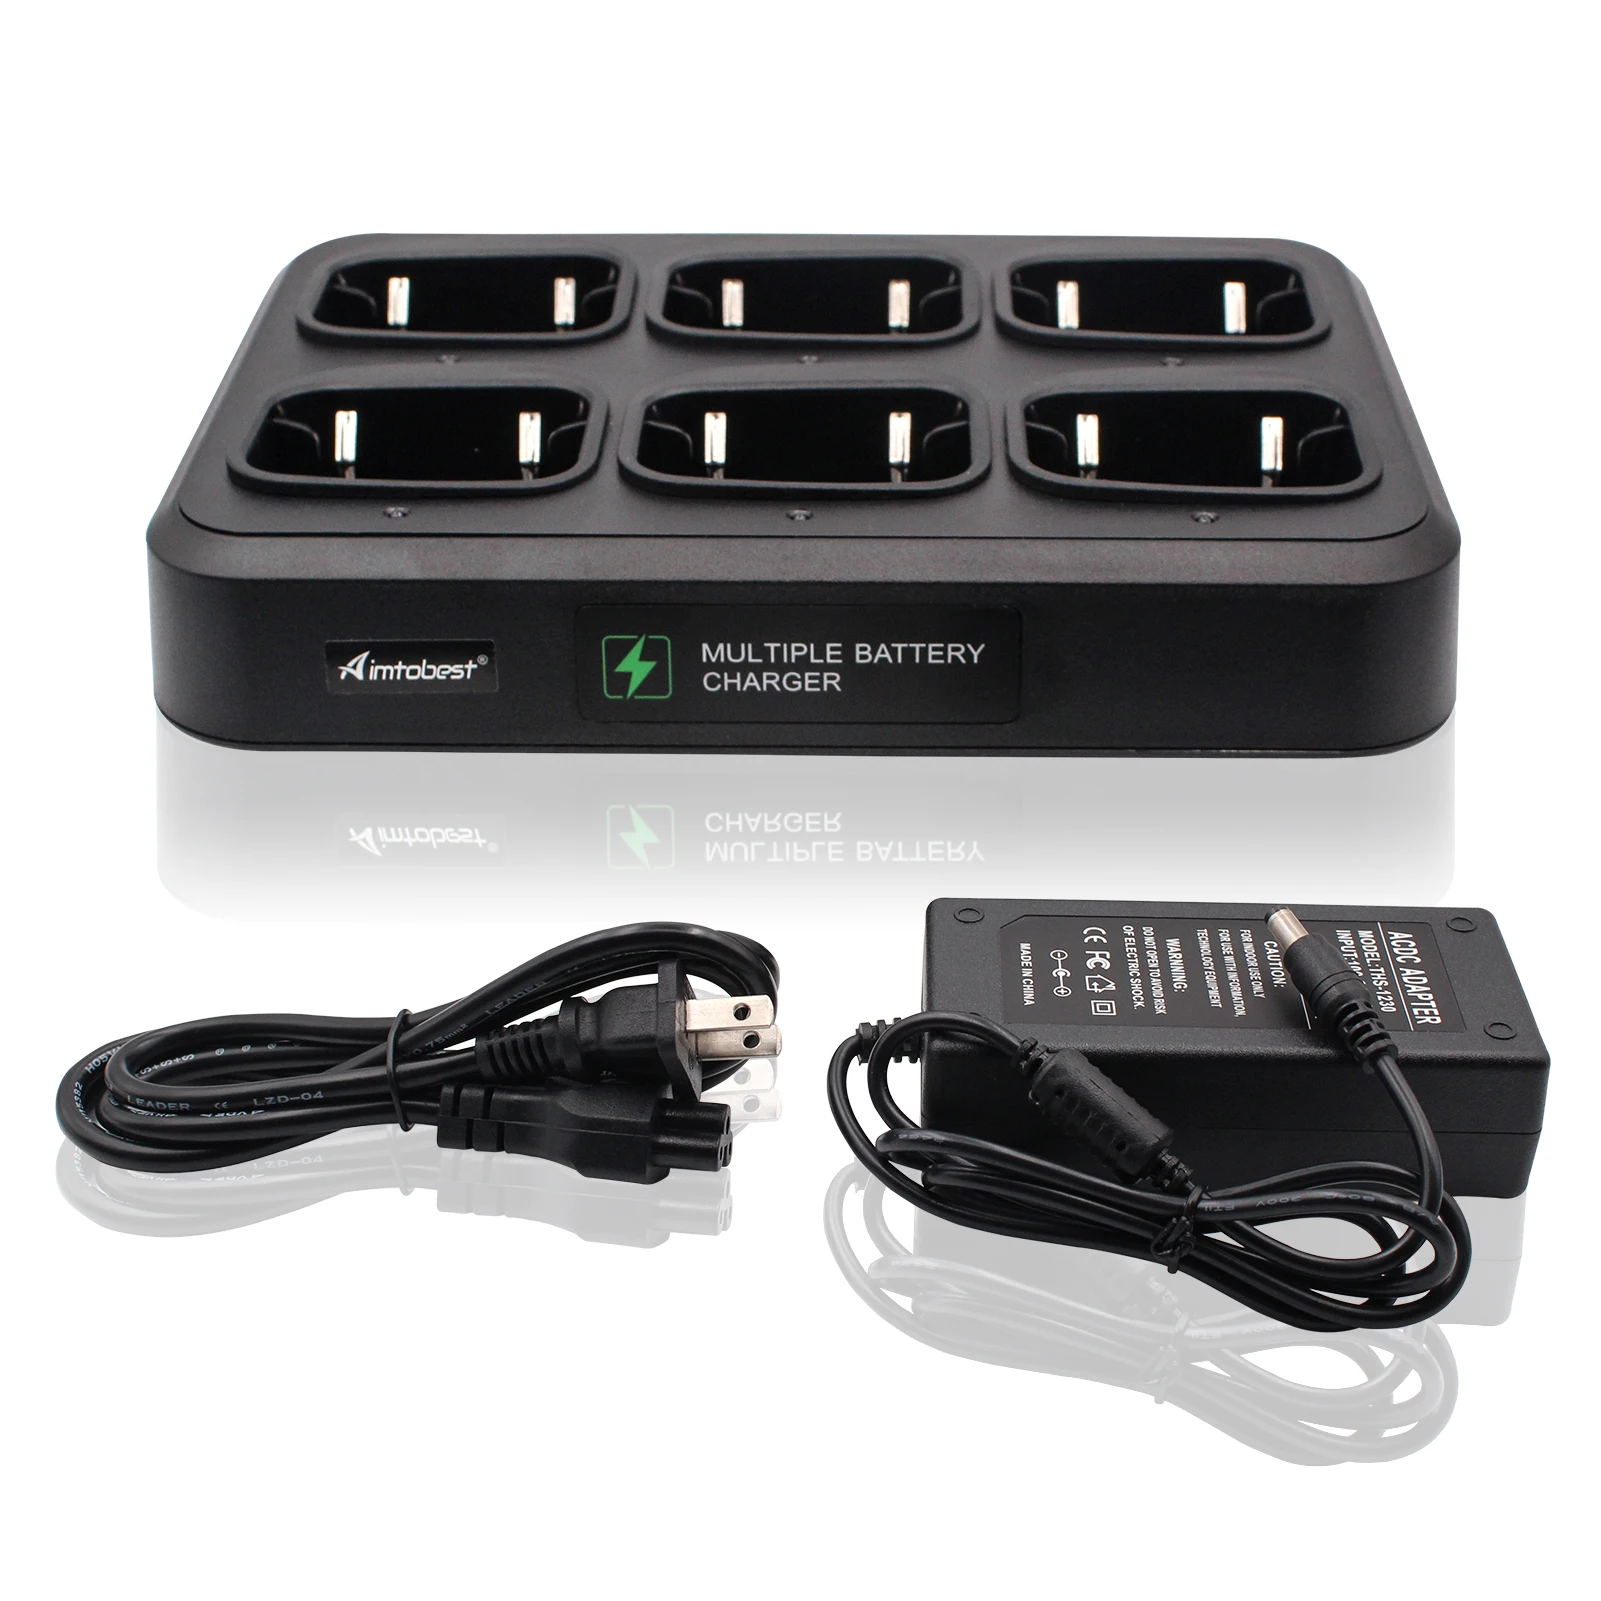 MCL15 6 unit rapid charger Six Way Multi charger for HYTERA HYT Radio TC-508 TC-446S TC-518 TC-580 TC-500S TC-585 TC-560 TC-510